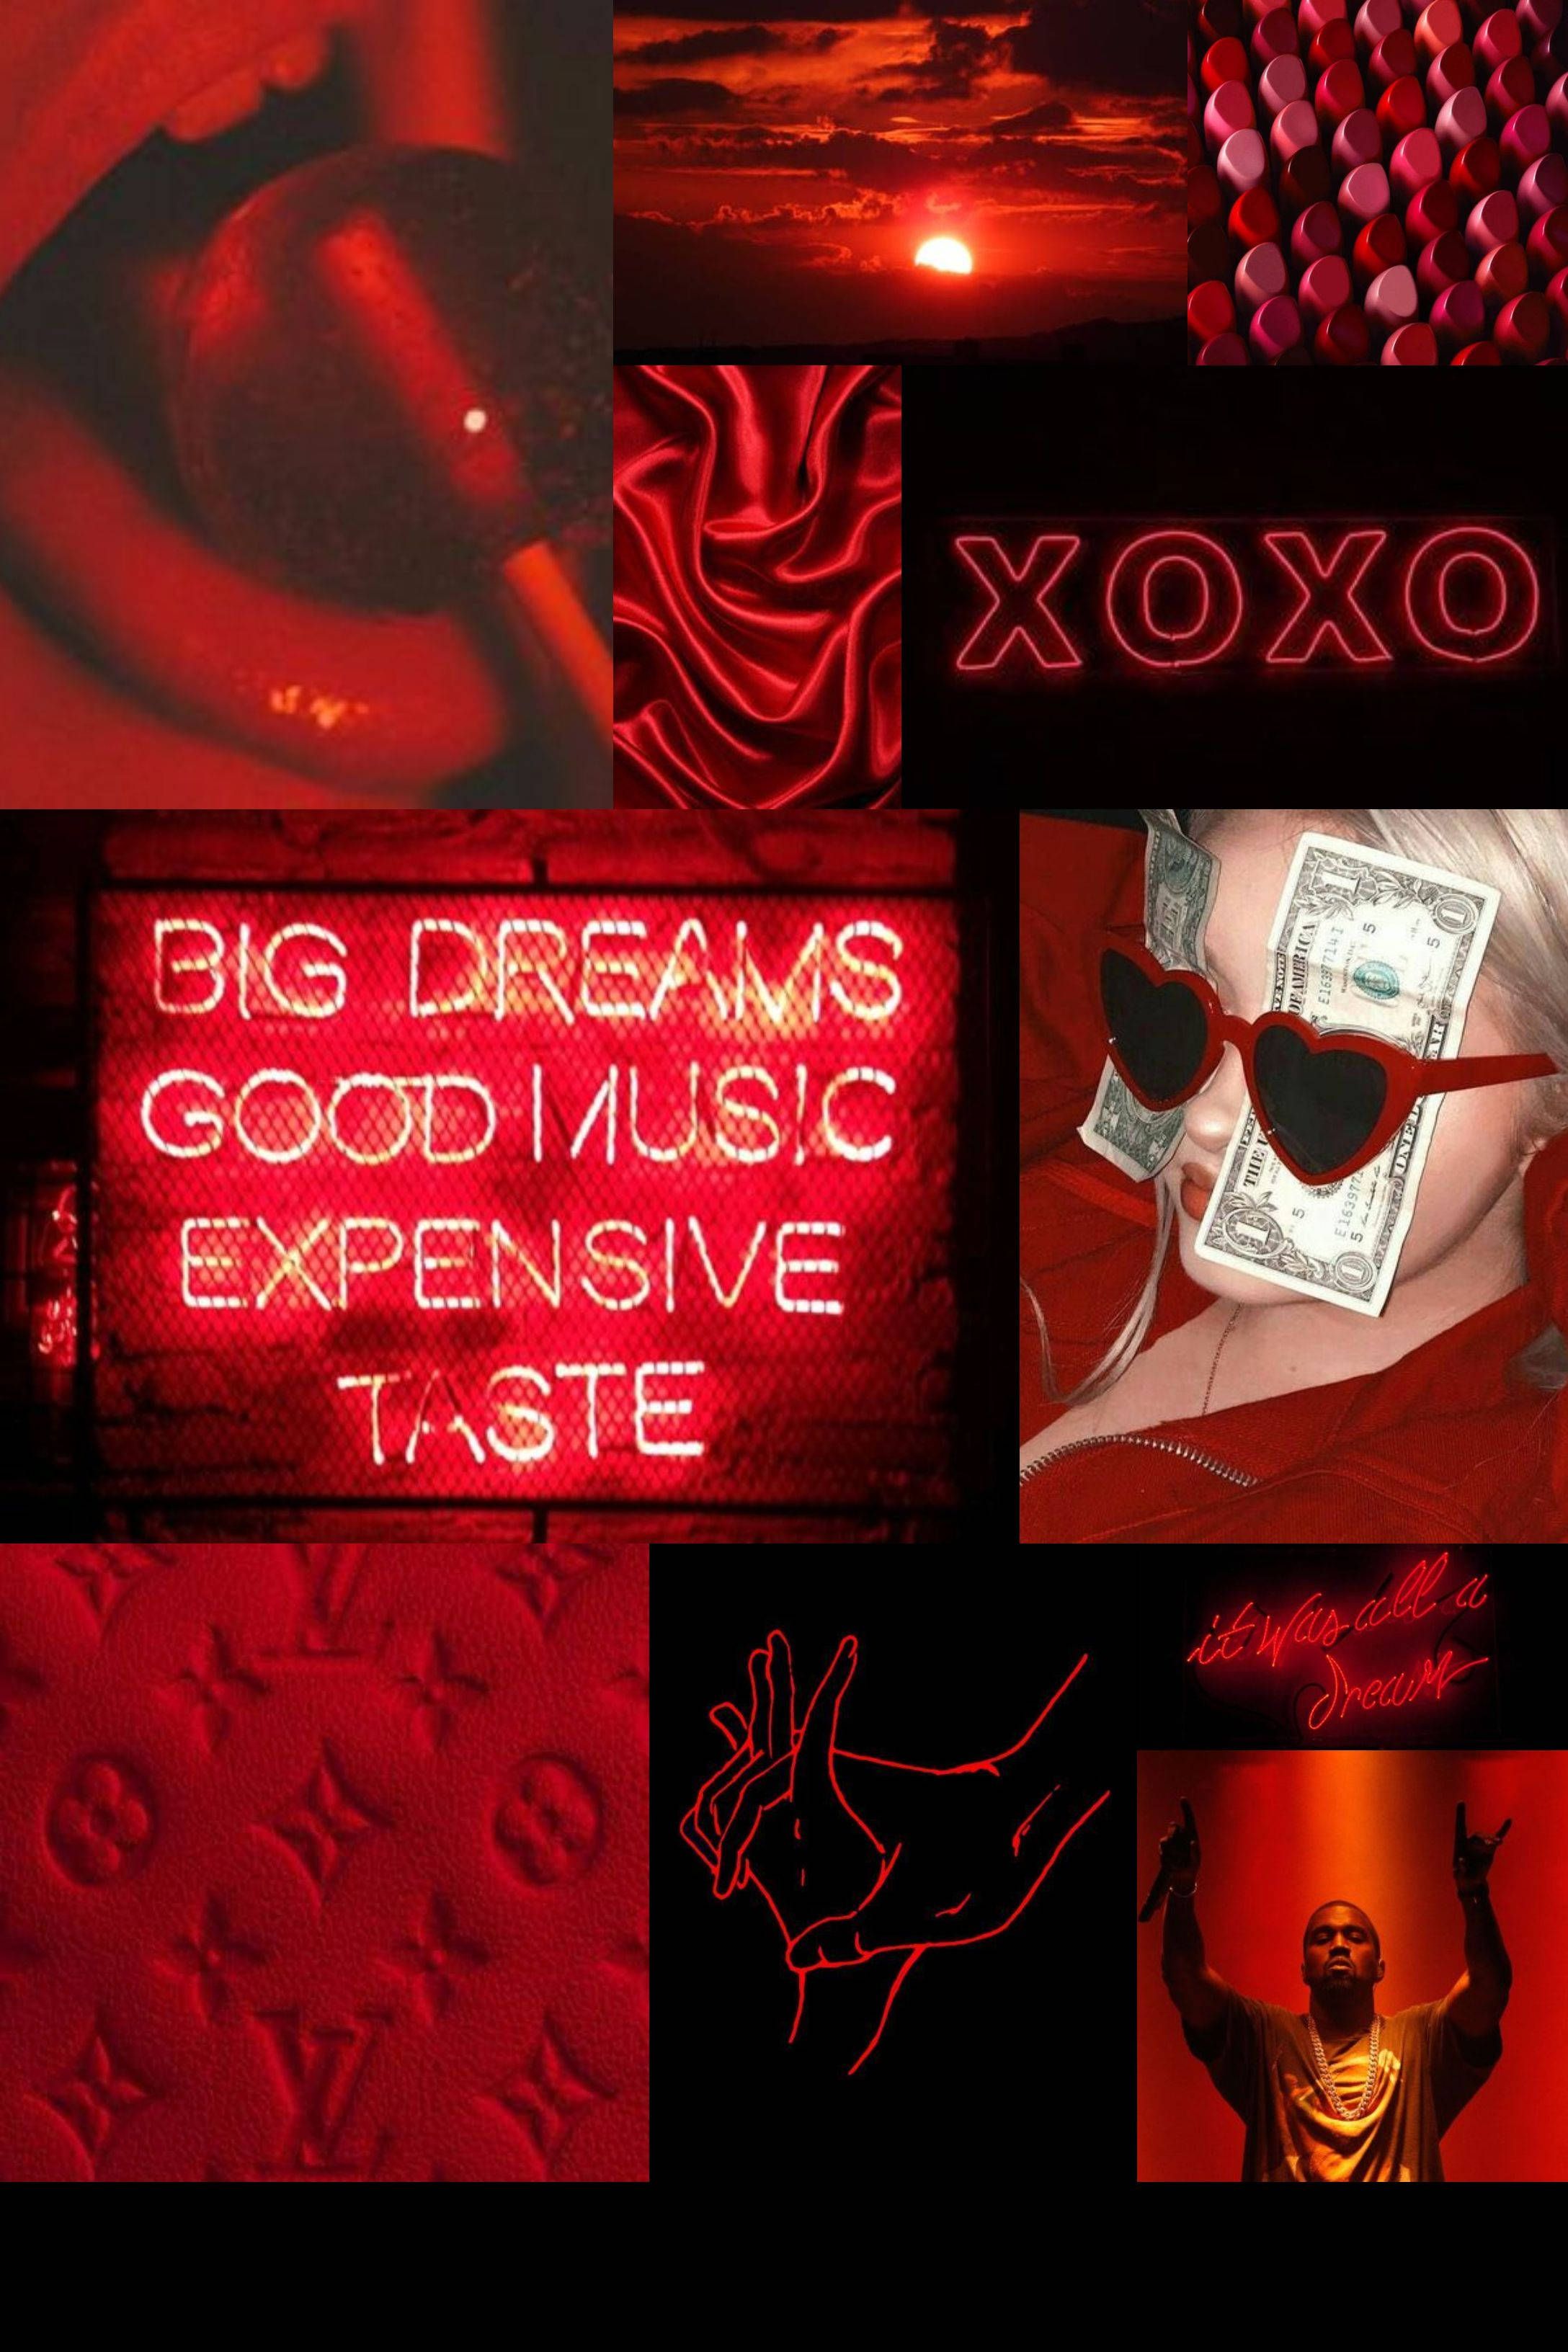 A collage of pictures with neon red and black - Red, iPhone red, neon red